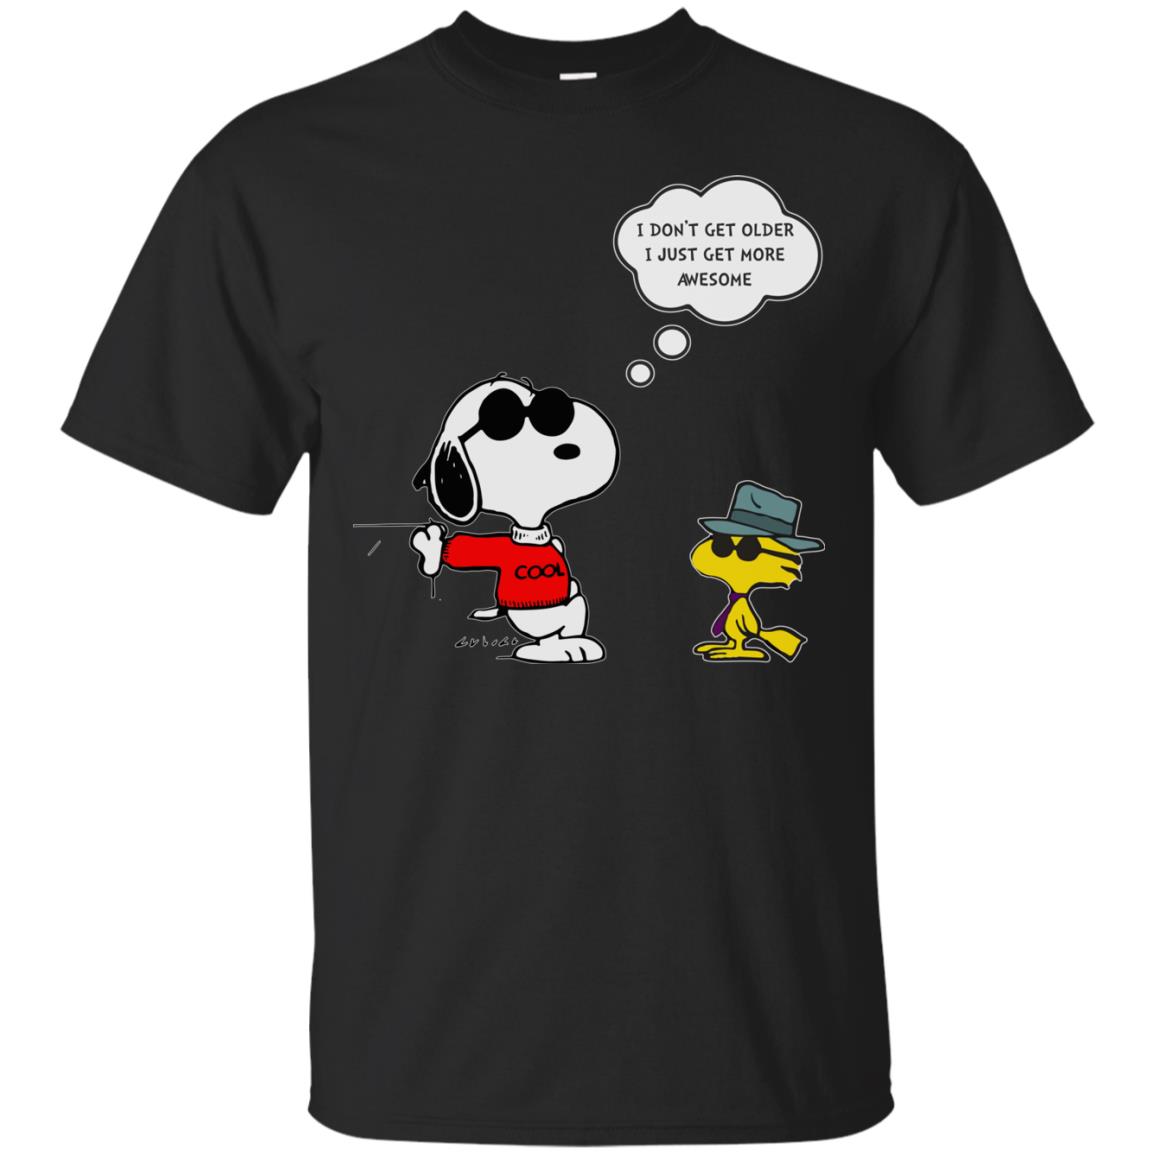 Snoopy - I dont get older I just get more awesome t-shirts, hoodies, tank